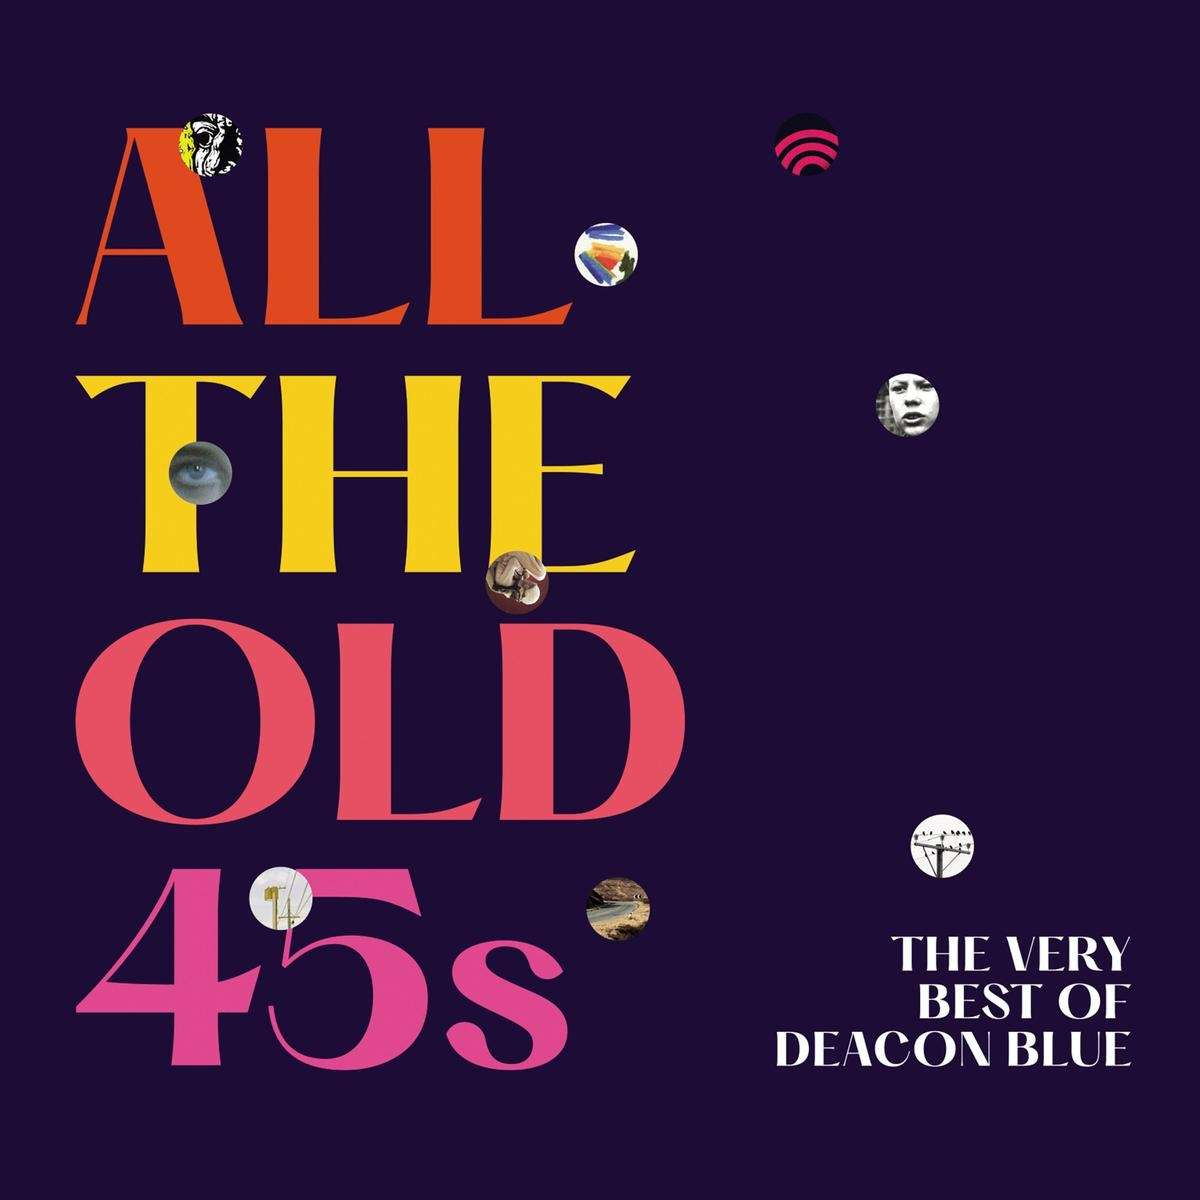 ALL THE OLD 45S: THE VERY BEST OF [2 LP 140G, GATEFOLD SLEEVE]